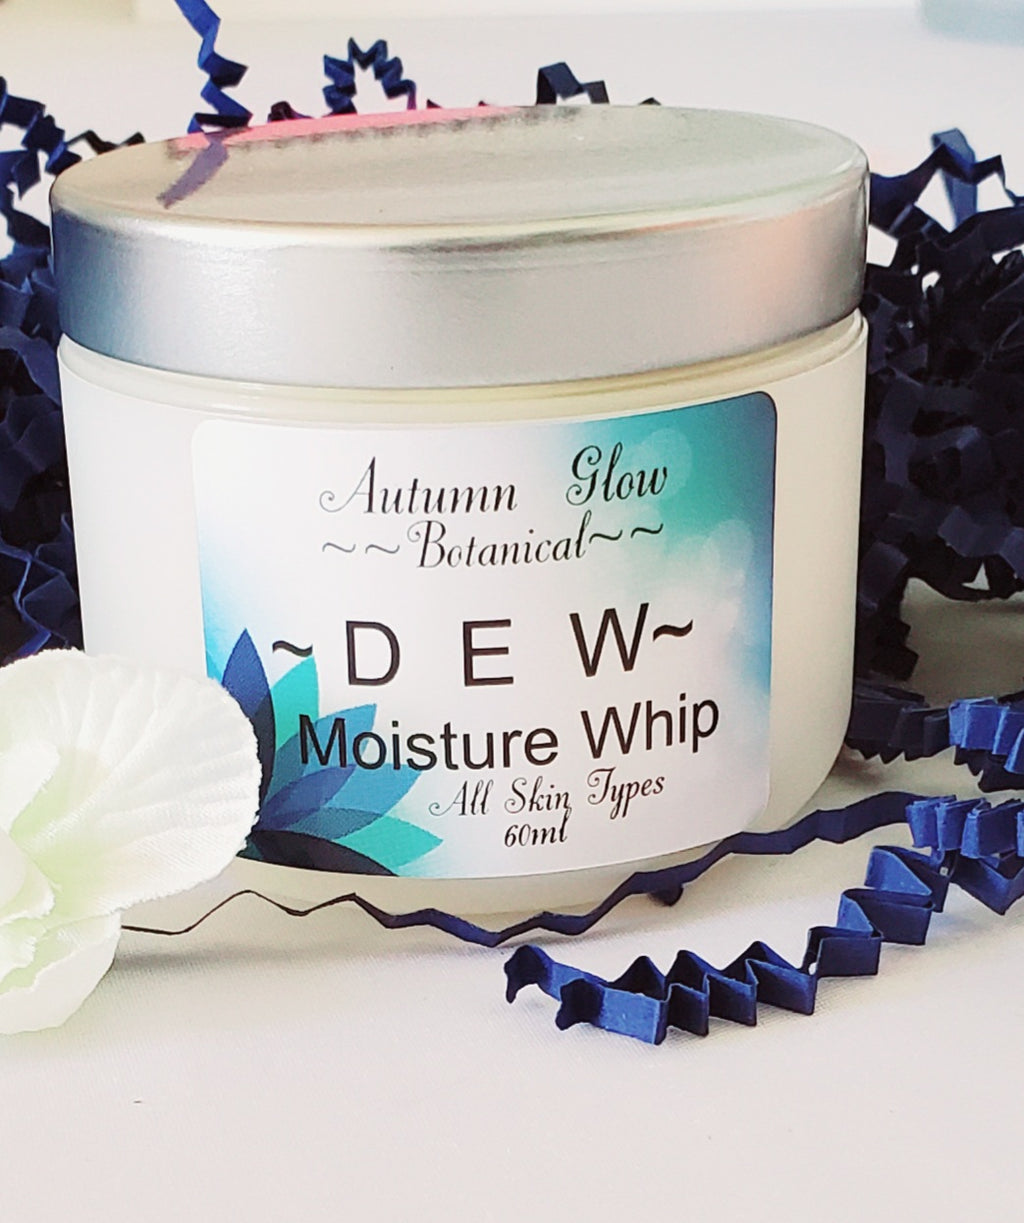 DEW.  Moisture Whip Hydrating Day & Night Face Cream